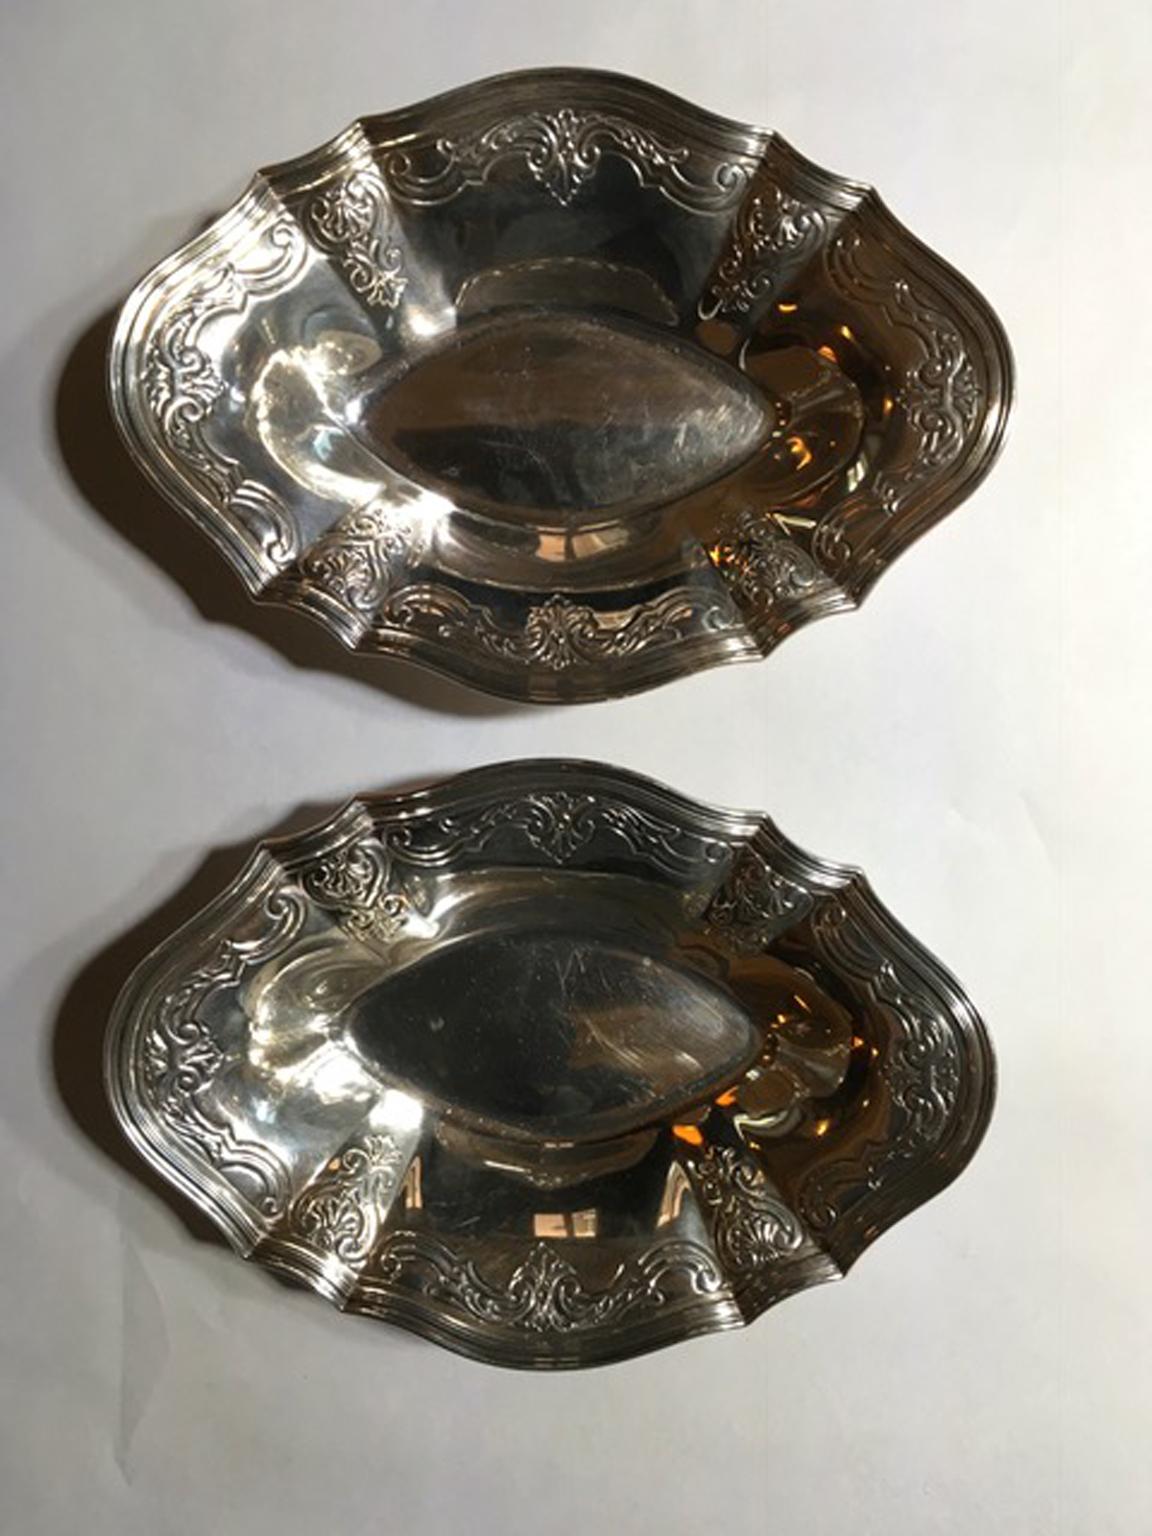 Tiffany pair of Victorian sterling silver bowls, late 19th century, New York

This pair of elegant bowls are made in silver 925/1000 by Tiffany & Co. marked on base and numbered 17954 - 1056
Pieces of timeless beauty.
With certificate of